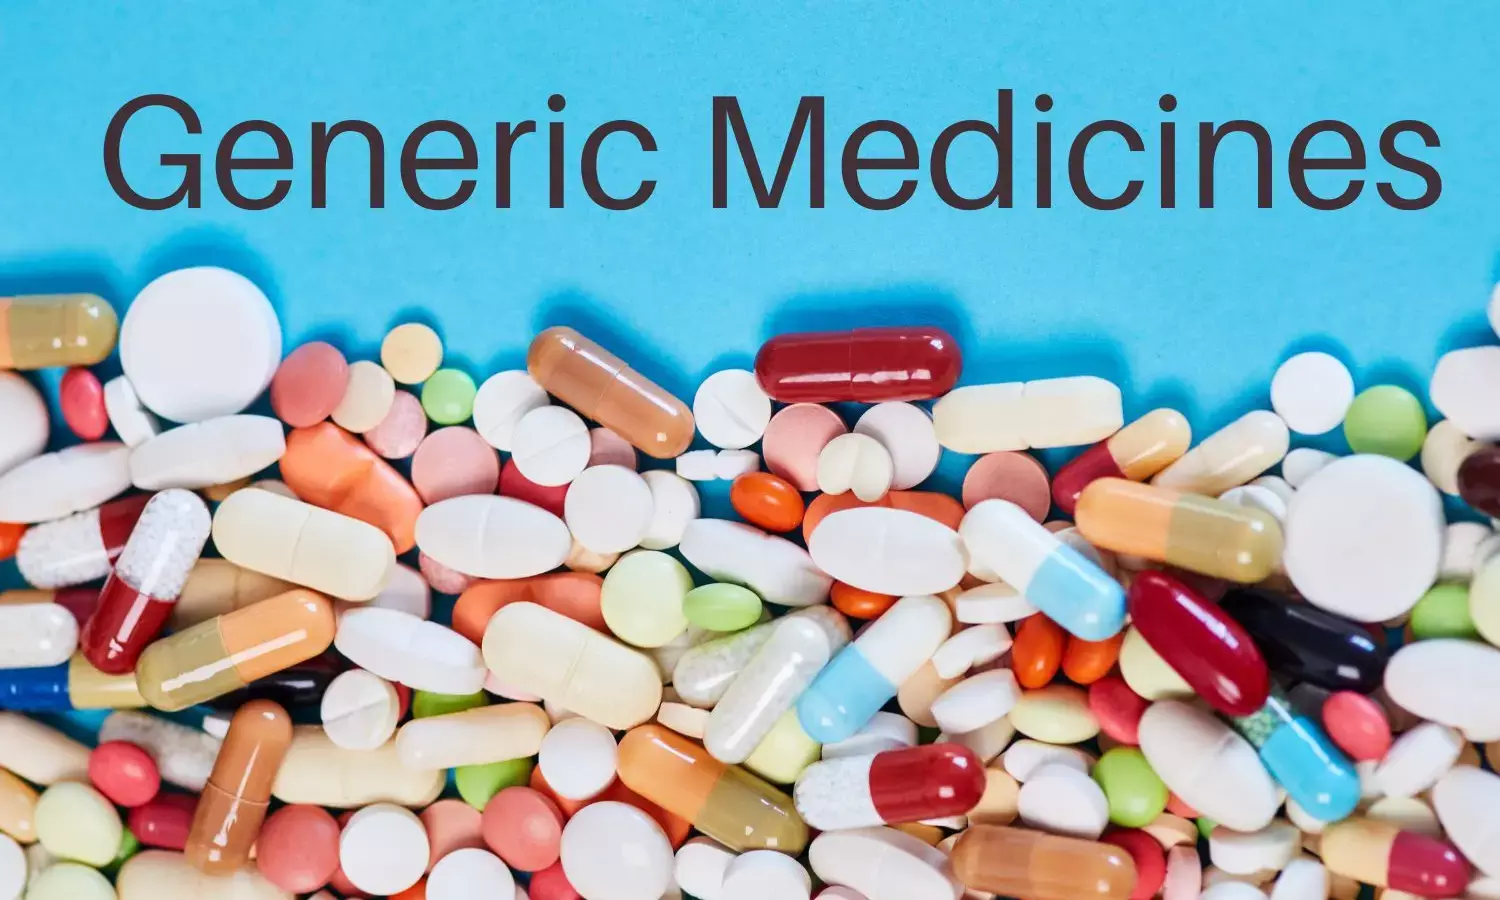 Disciplinary Action against Doctors over failure to prescribe generic